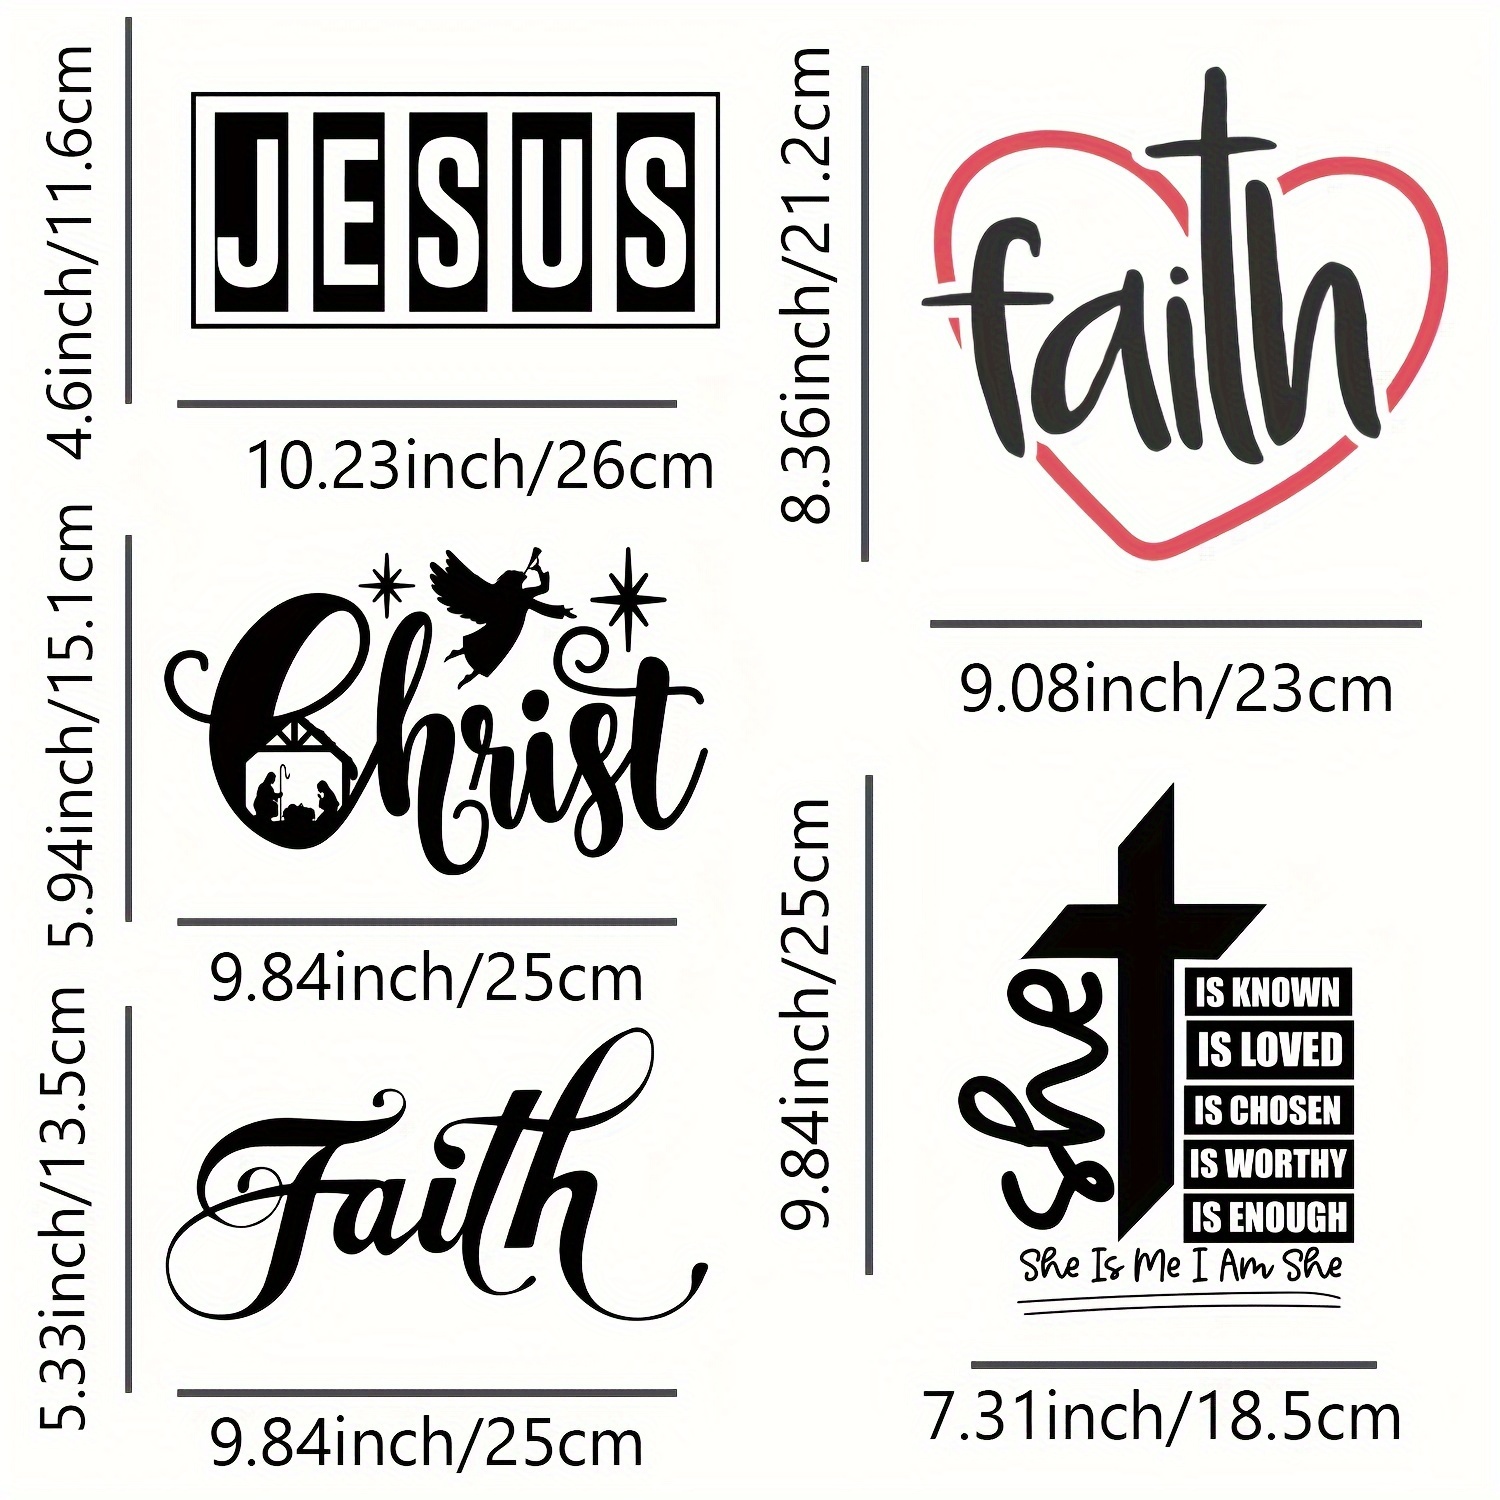 New Jesus Cross Embroidered Patches for Clothes DIY Iron on Patches  Clothing Jeans Jesus Cross Patch Backpack Stripe Badges